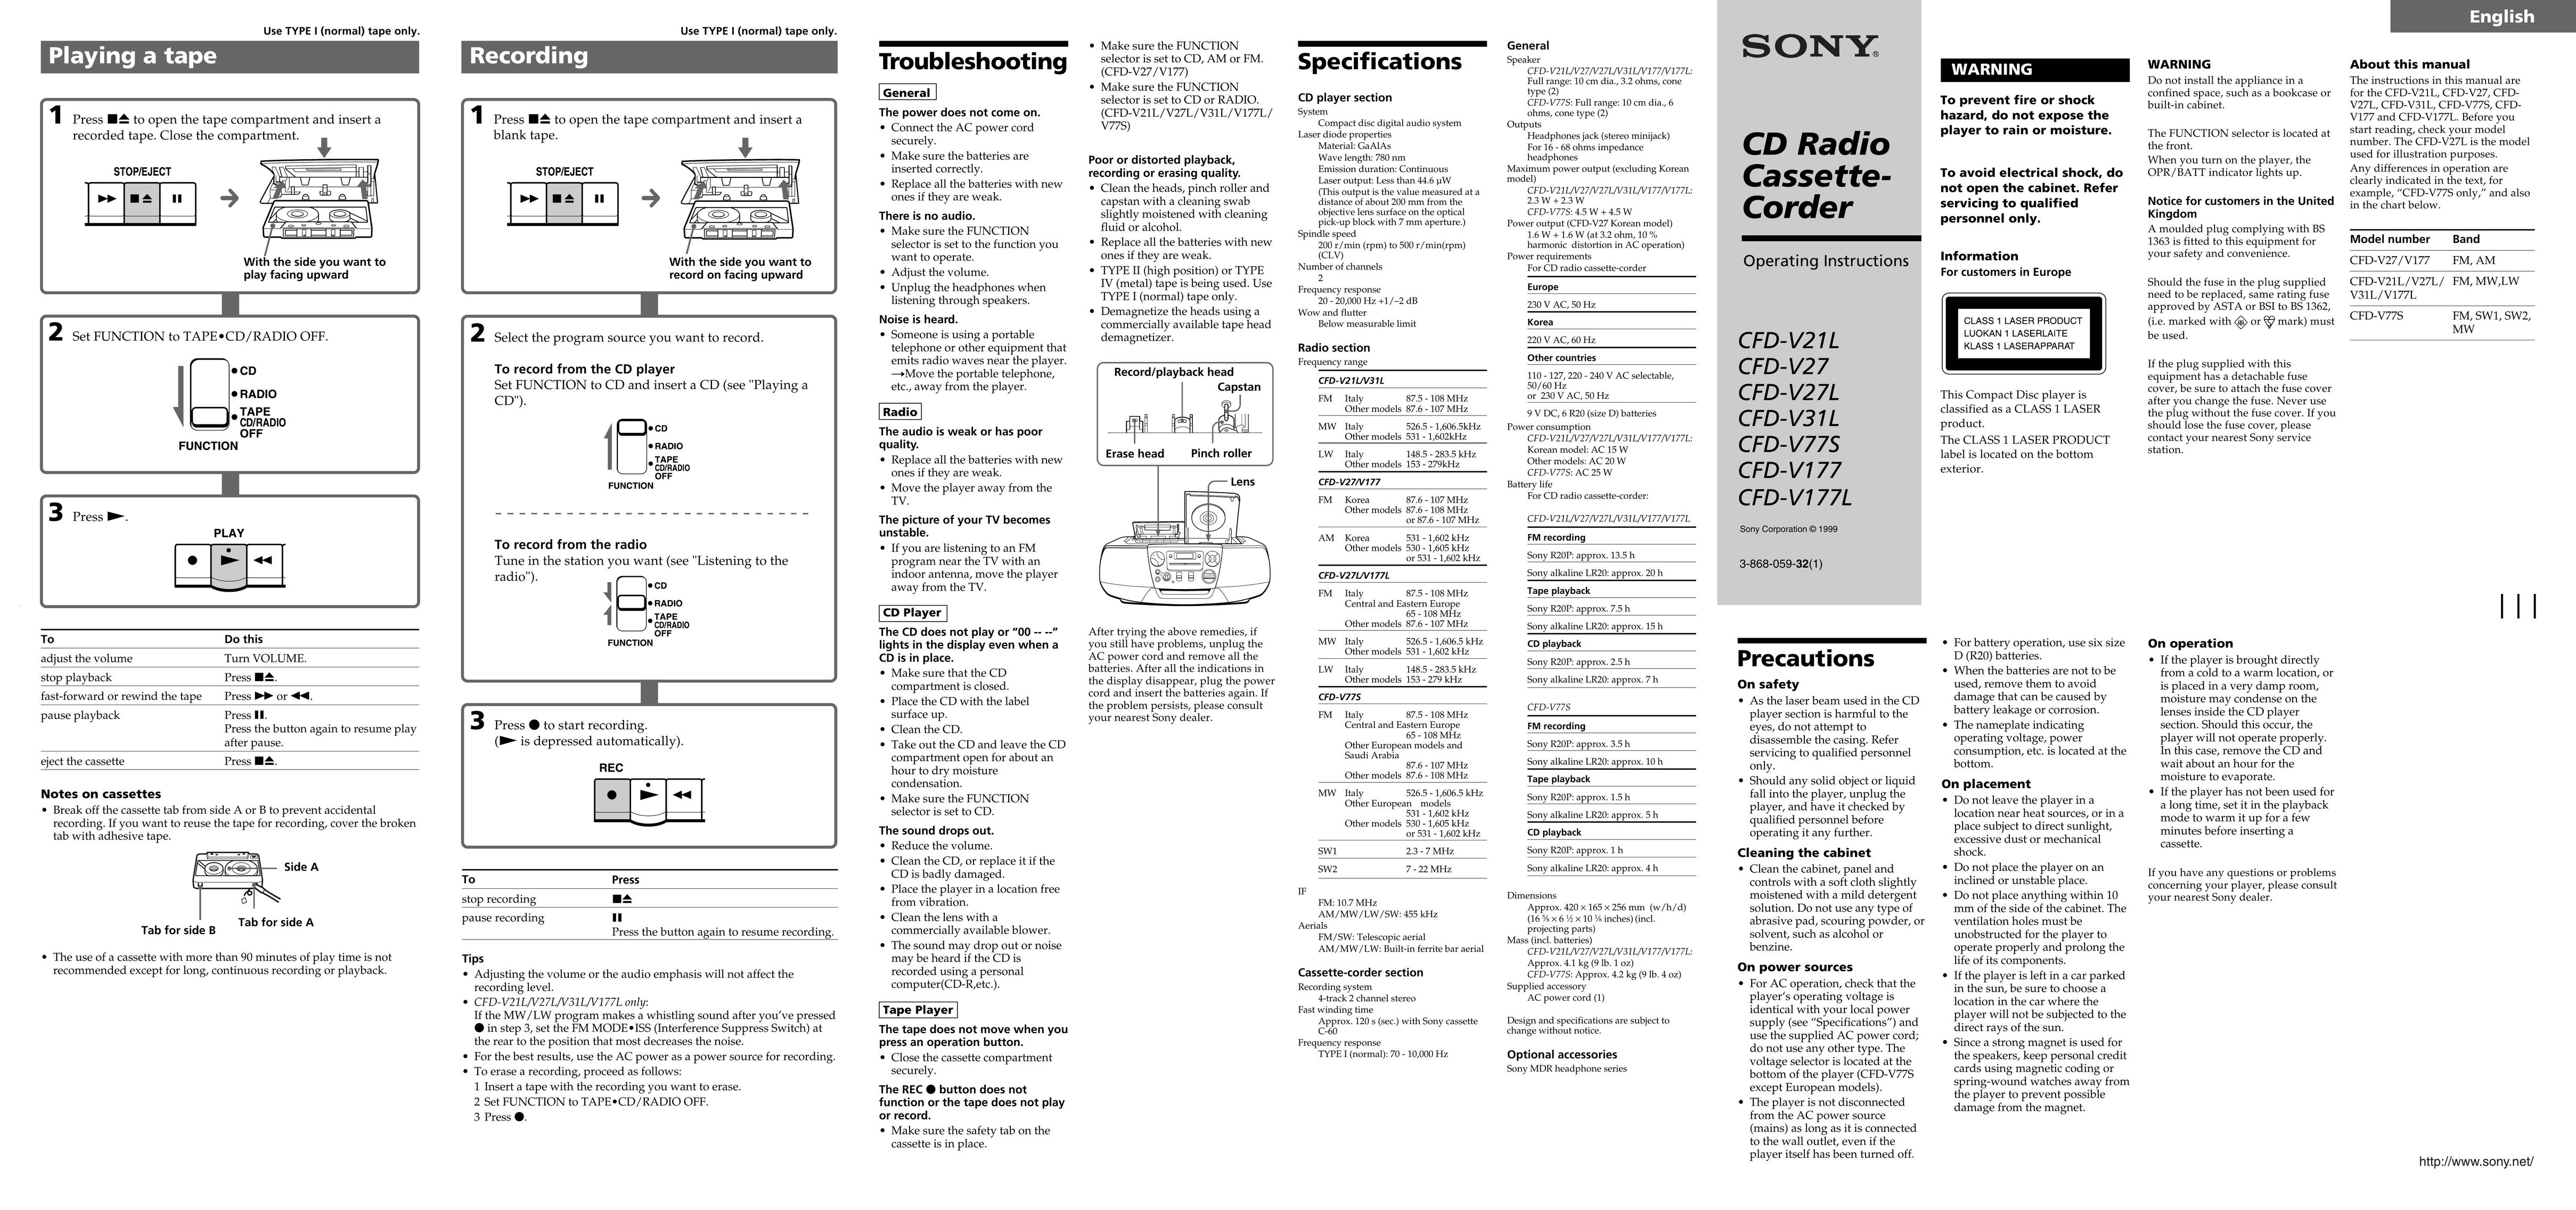 Sony CFD-V27L Portable CD Player User Manual